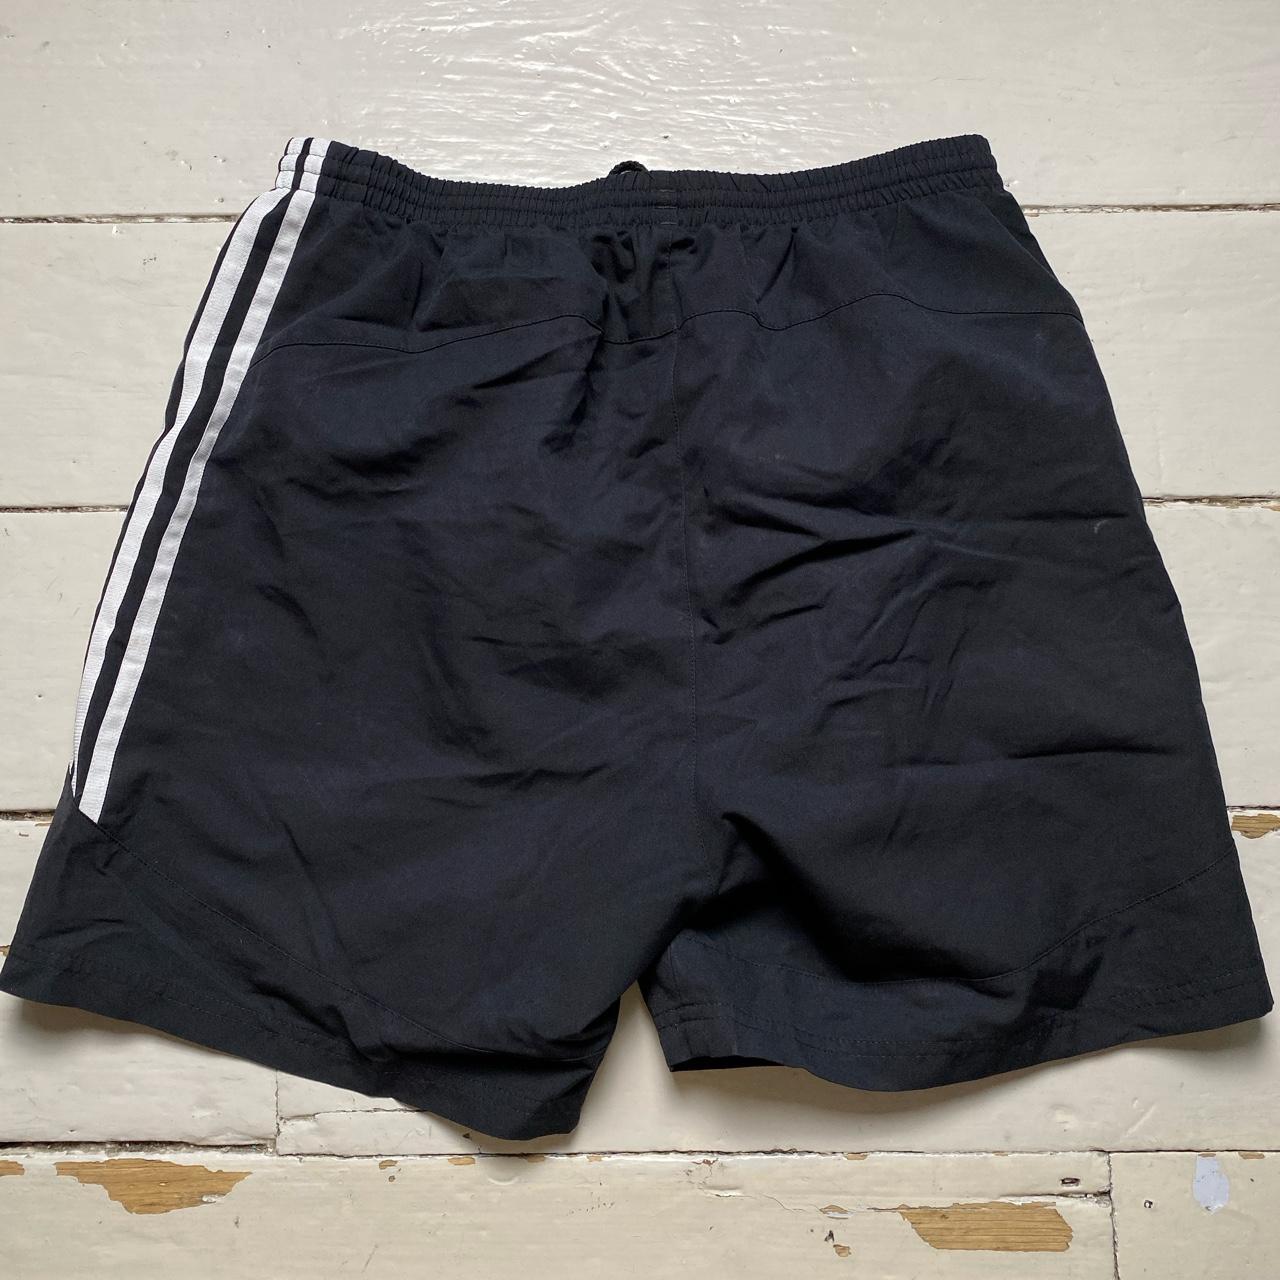 Adidas Black and White Baggy Shell Track Pant Shorts